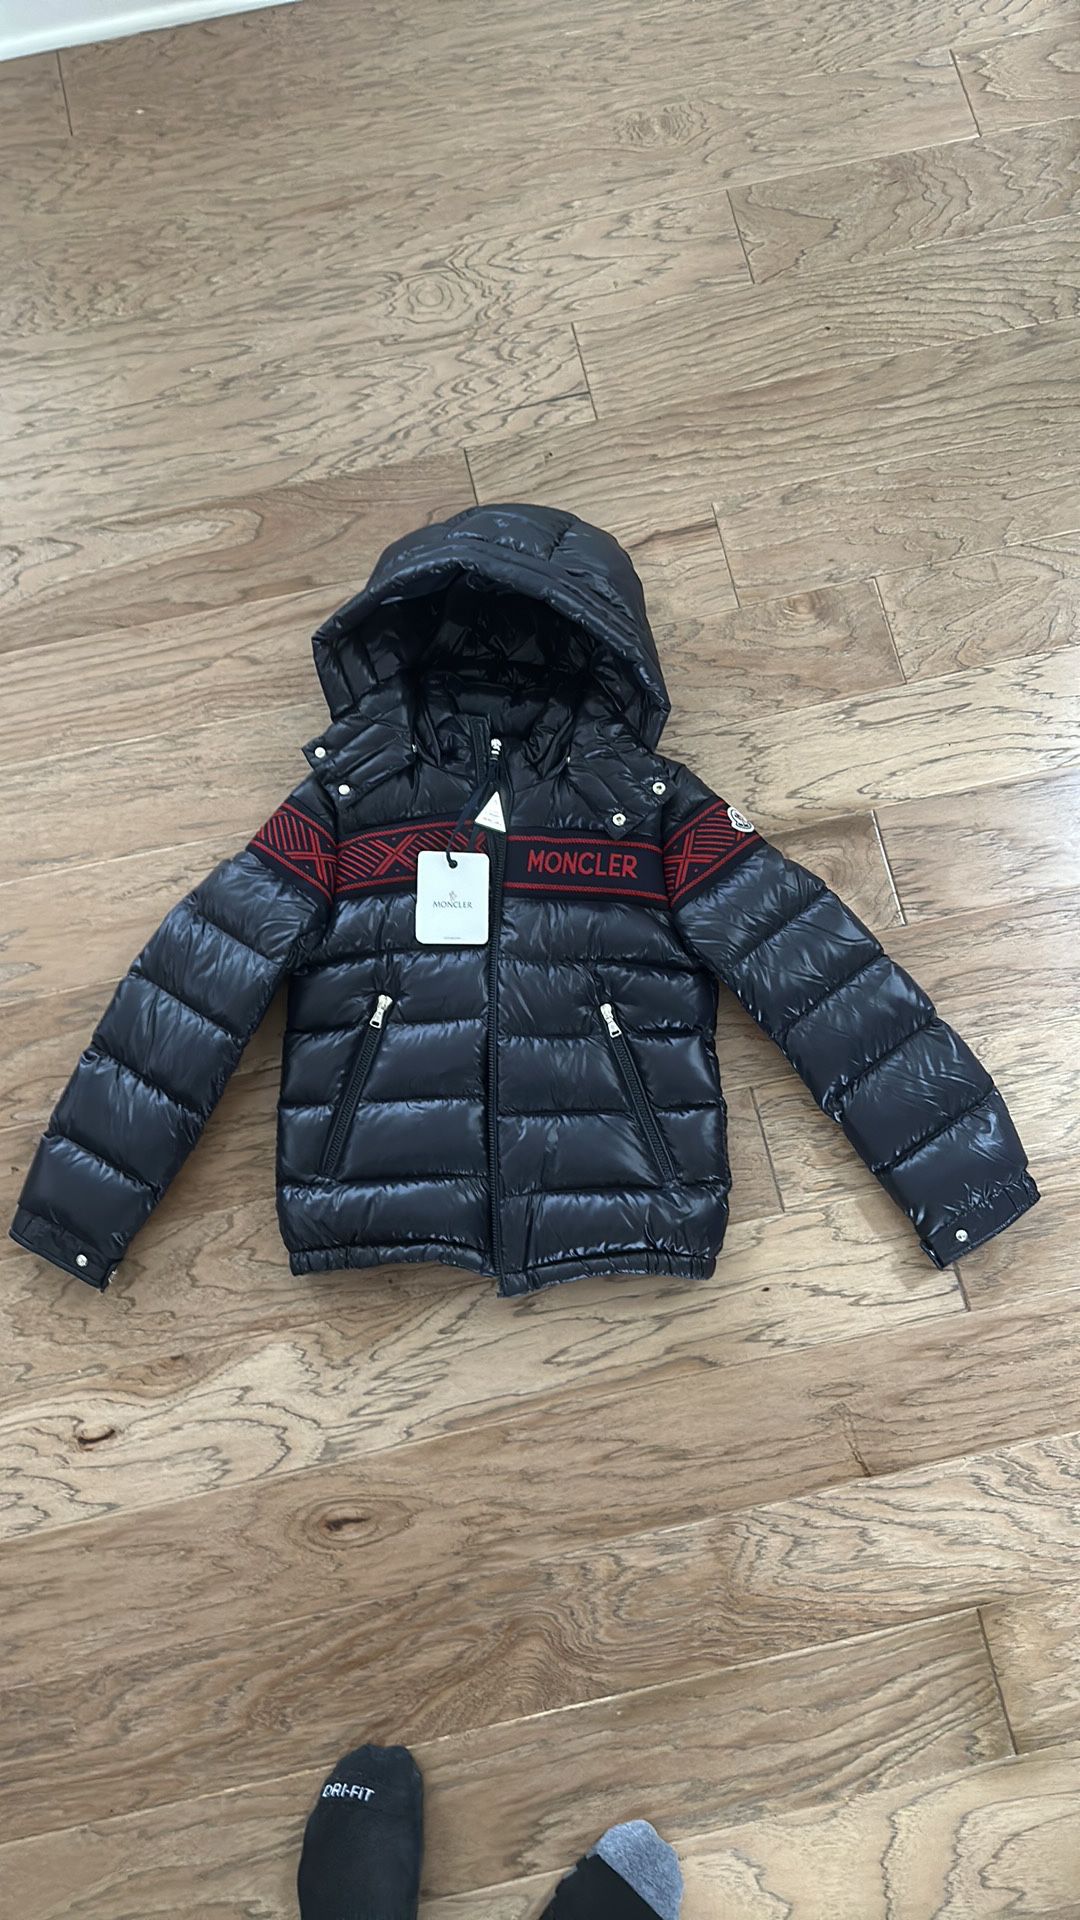 Moncler NWT Perfect Condition